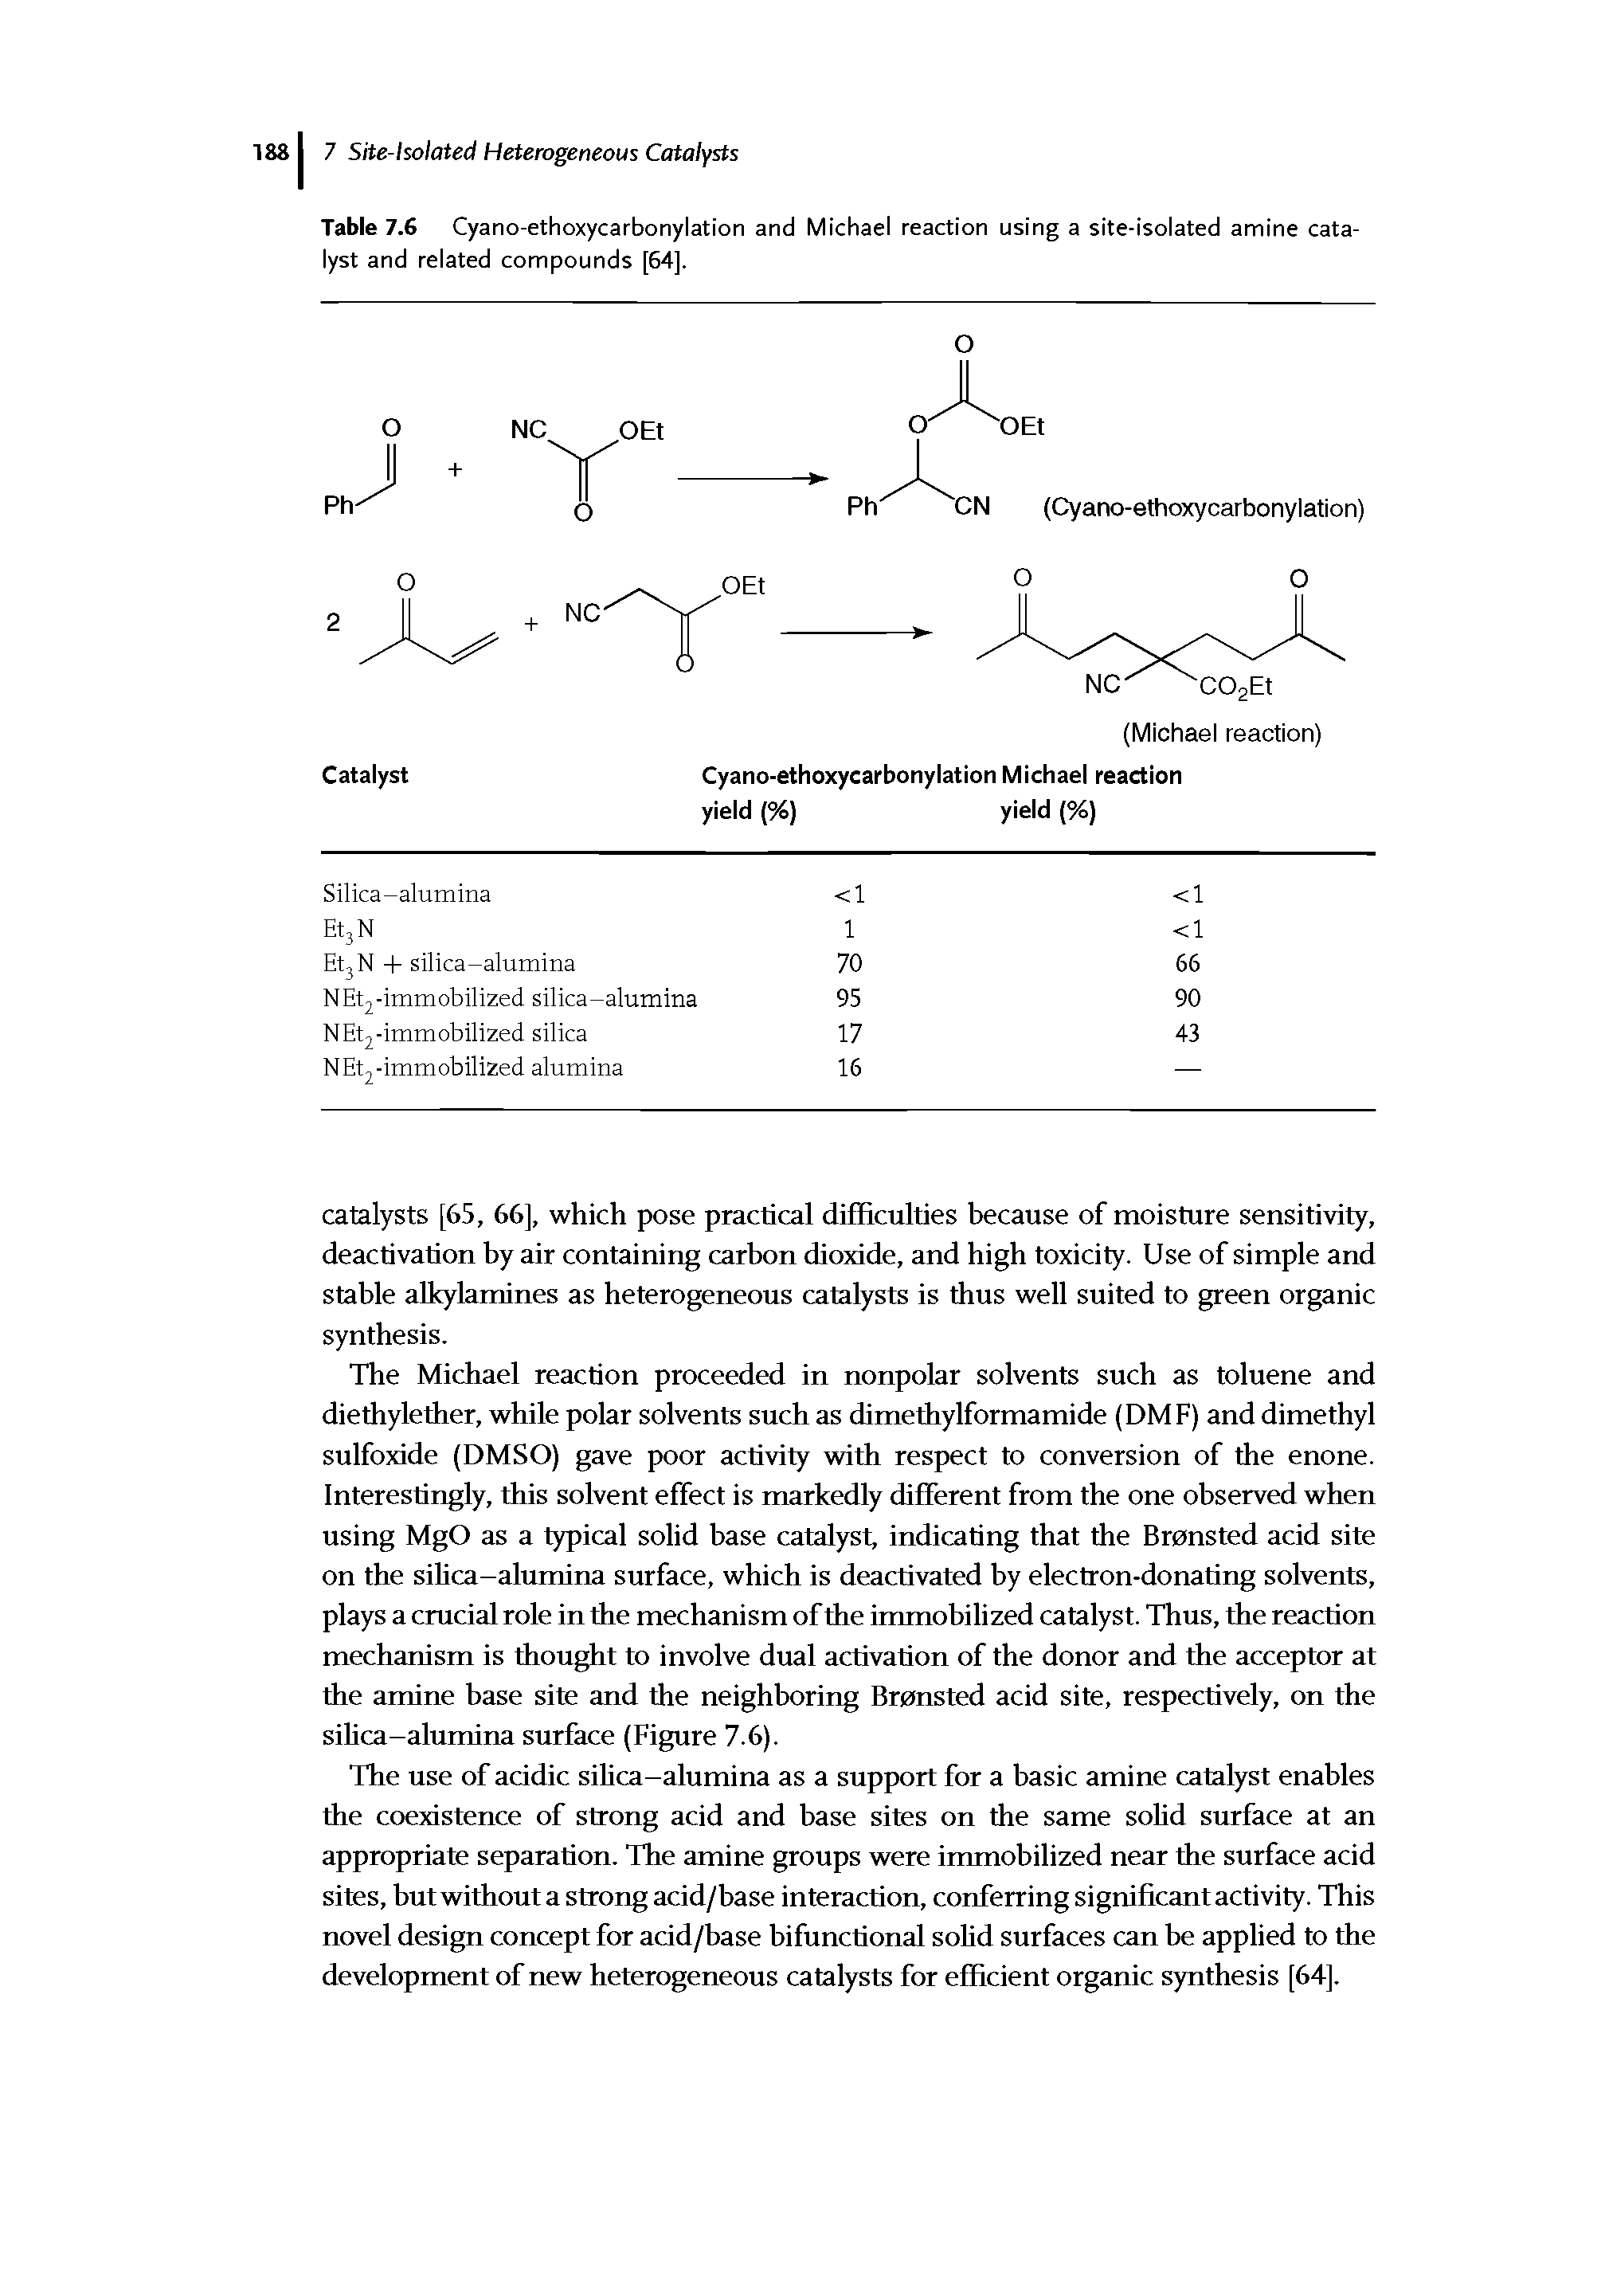 Table 7.6 Cyano-ethoxycarbonylation and Michael reaction using a site-isolated amine catalyst and related compounds [64].